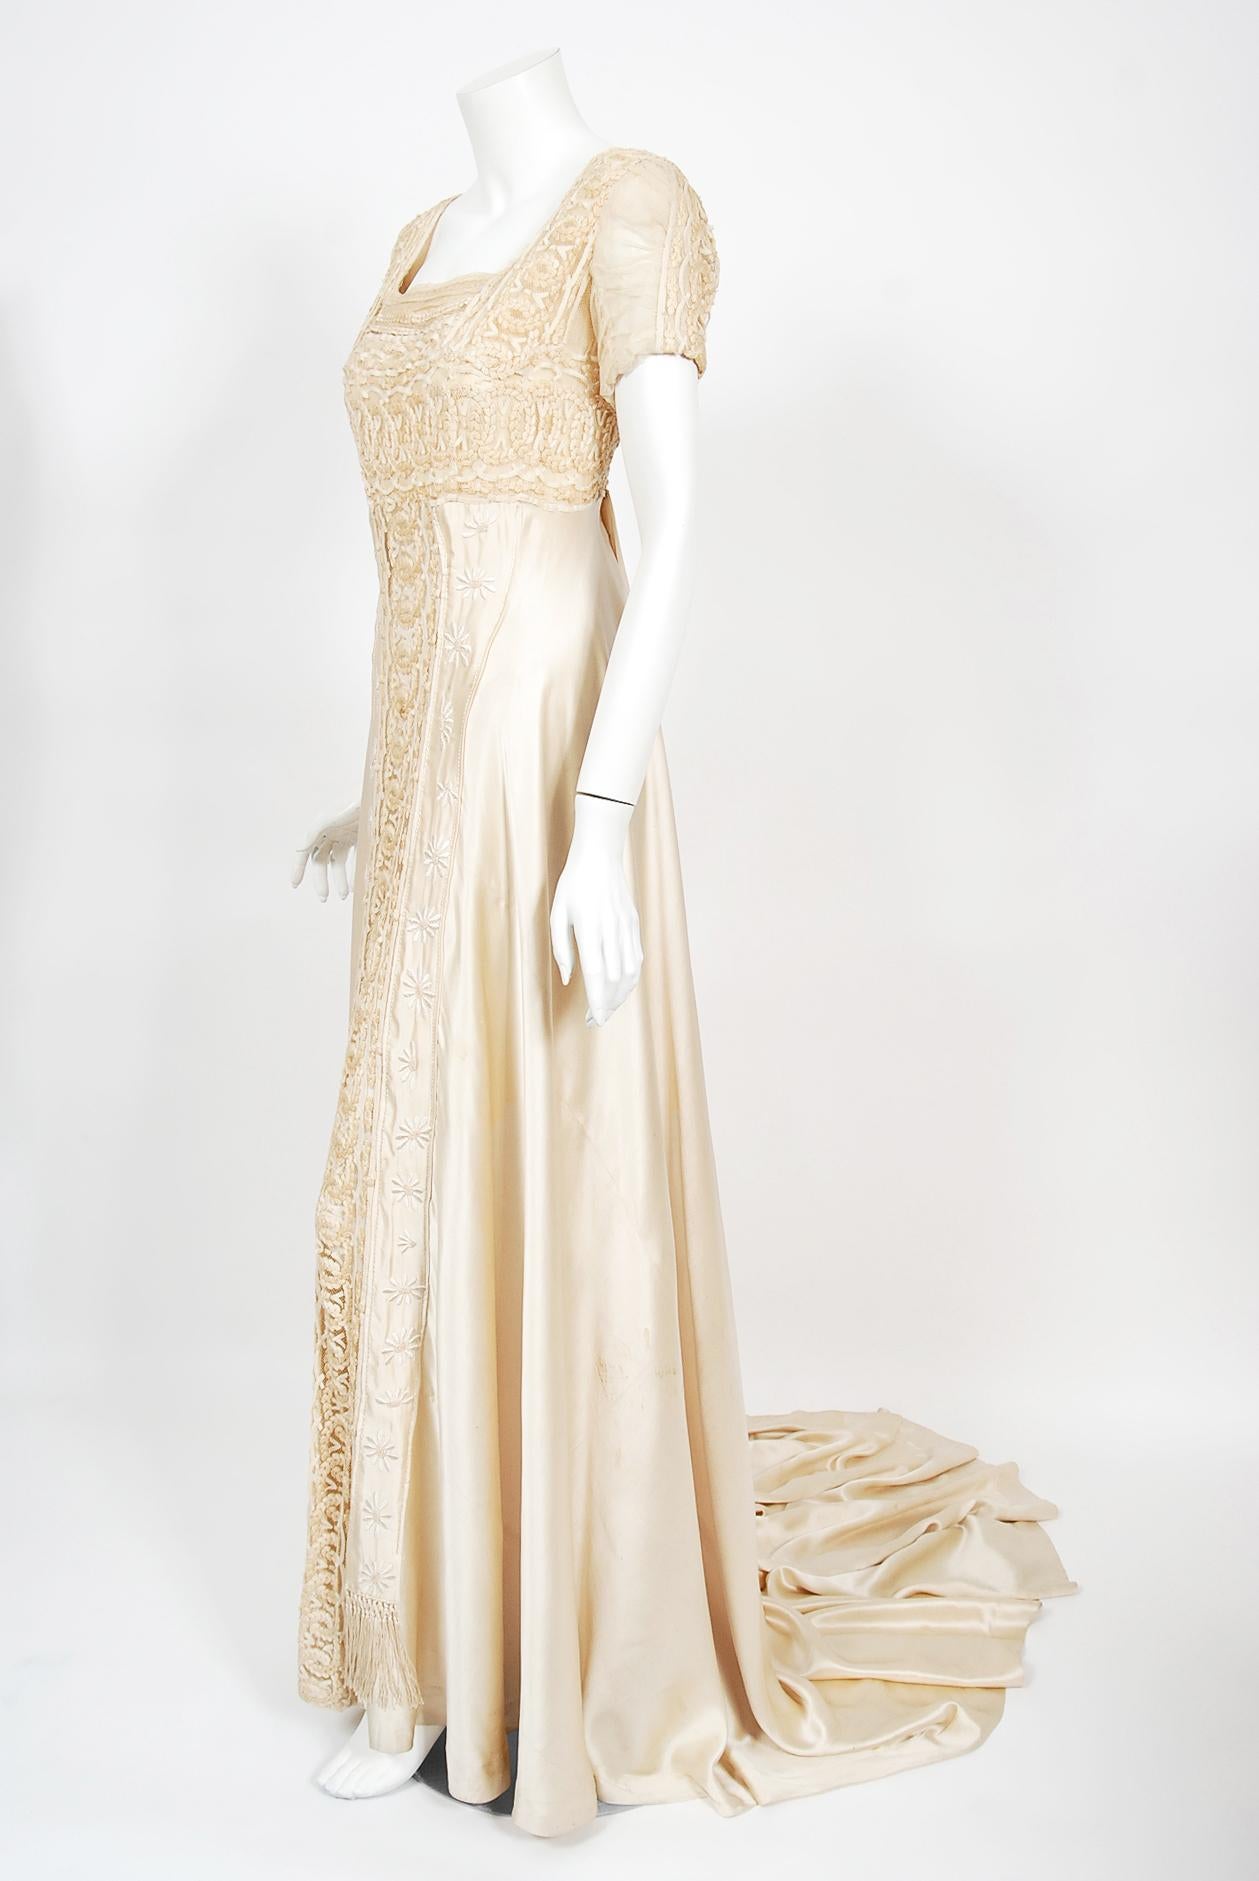 Ethereal bridal gowns from the early 20th century are perennial favorites and this one is a wedding show-stopper. The garment's effortless style is so modern; the intricate hand embroidery and fine fabrics are a treasure trove of couture needle art.